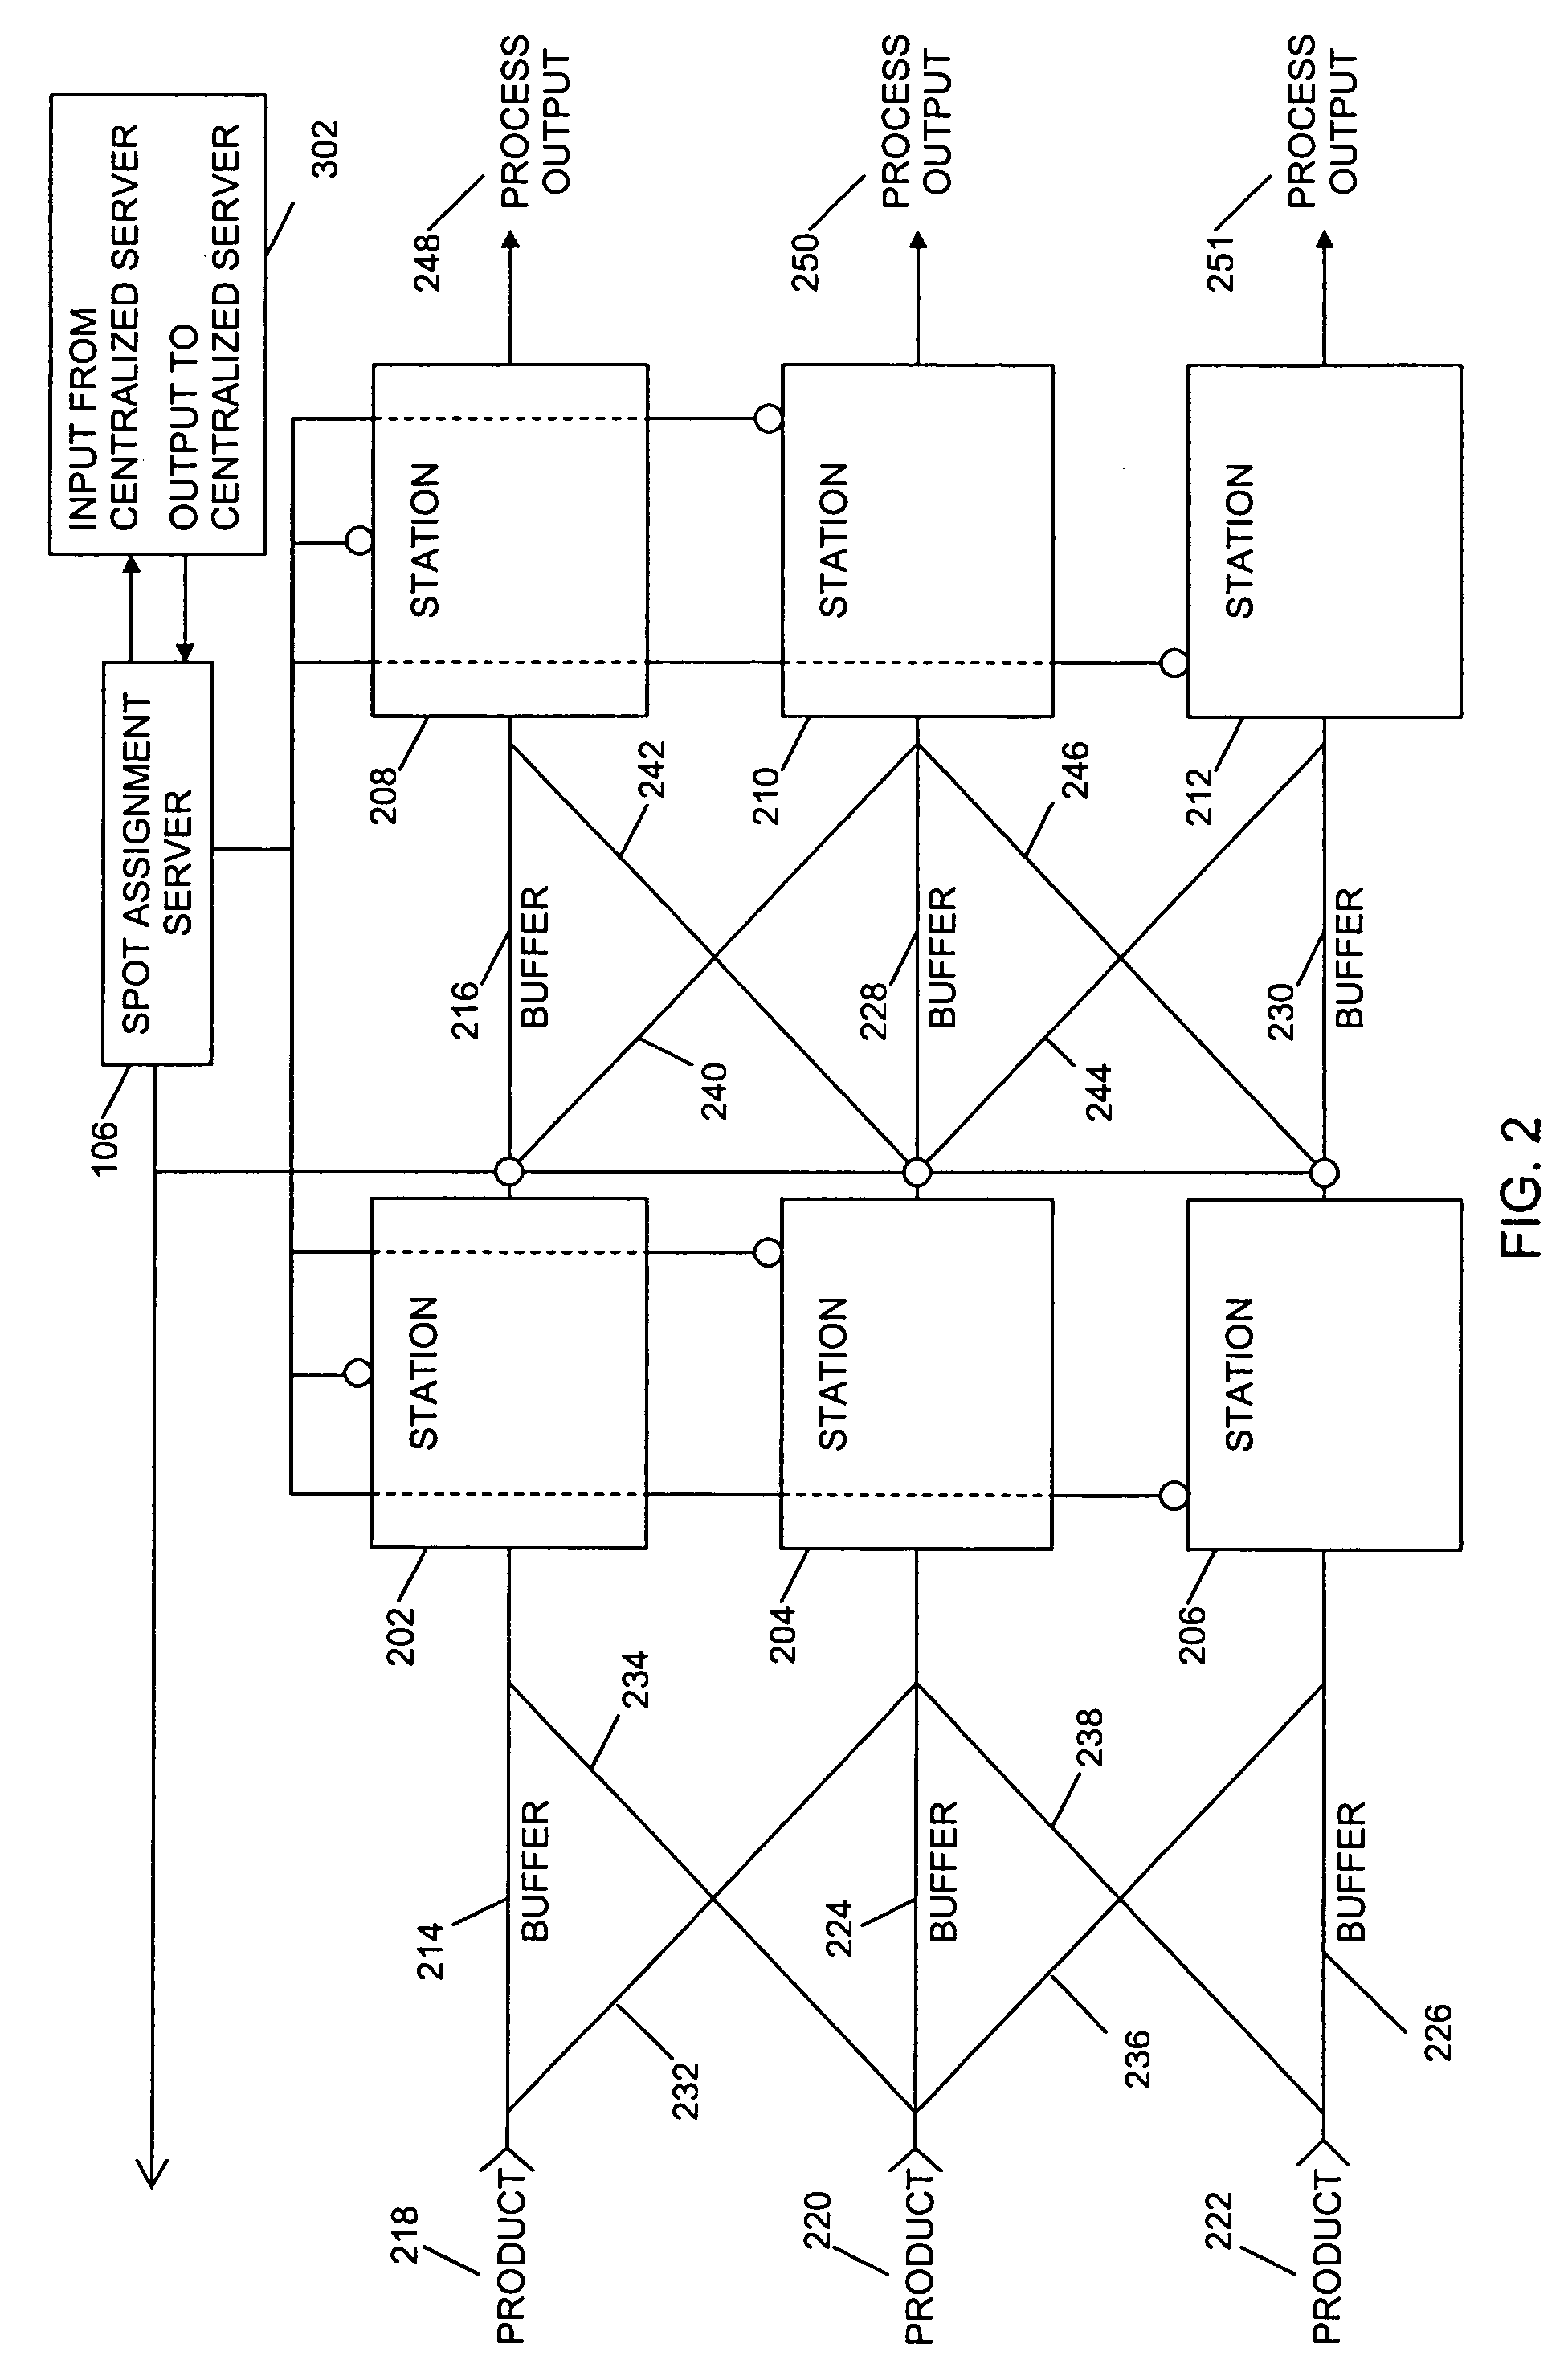 System and method for resource reallocation based on ambient condition data